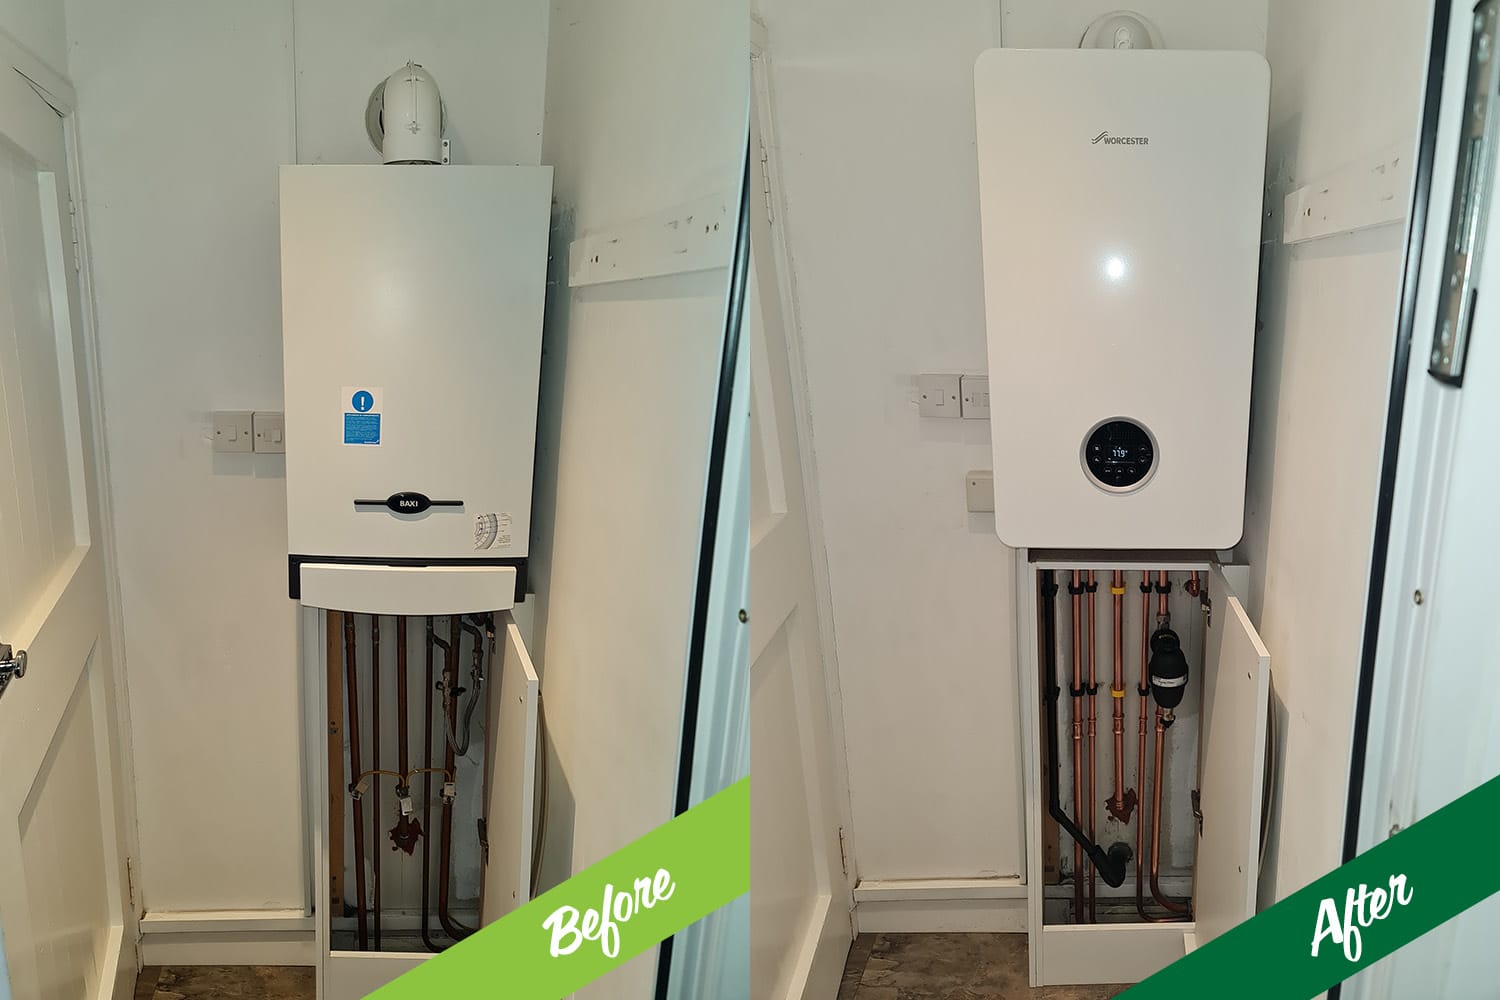 Boiler Before and After A